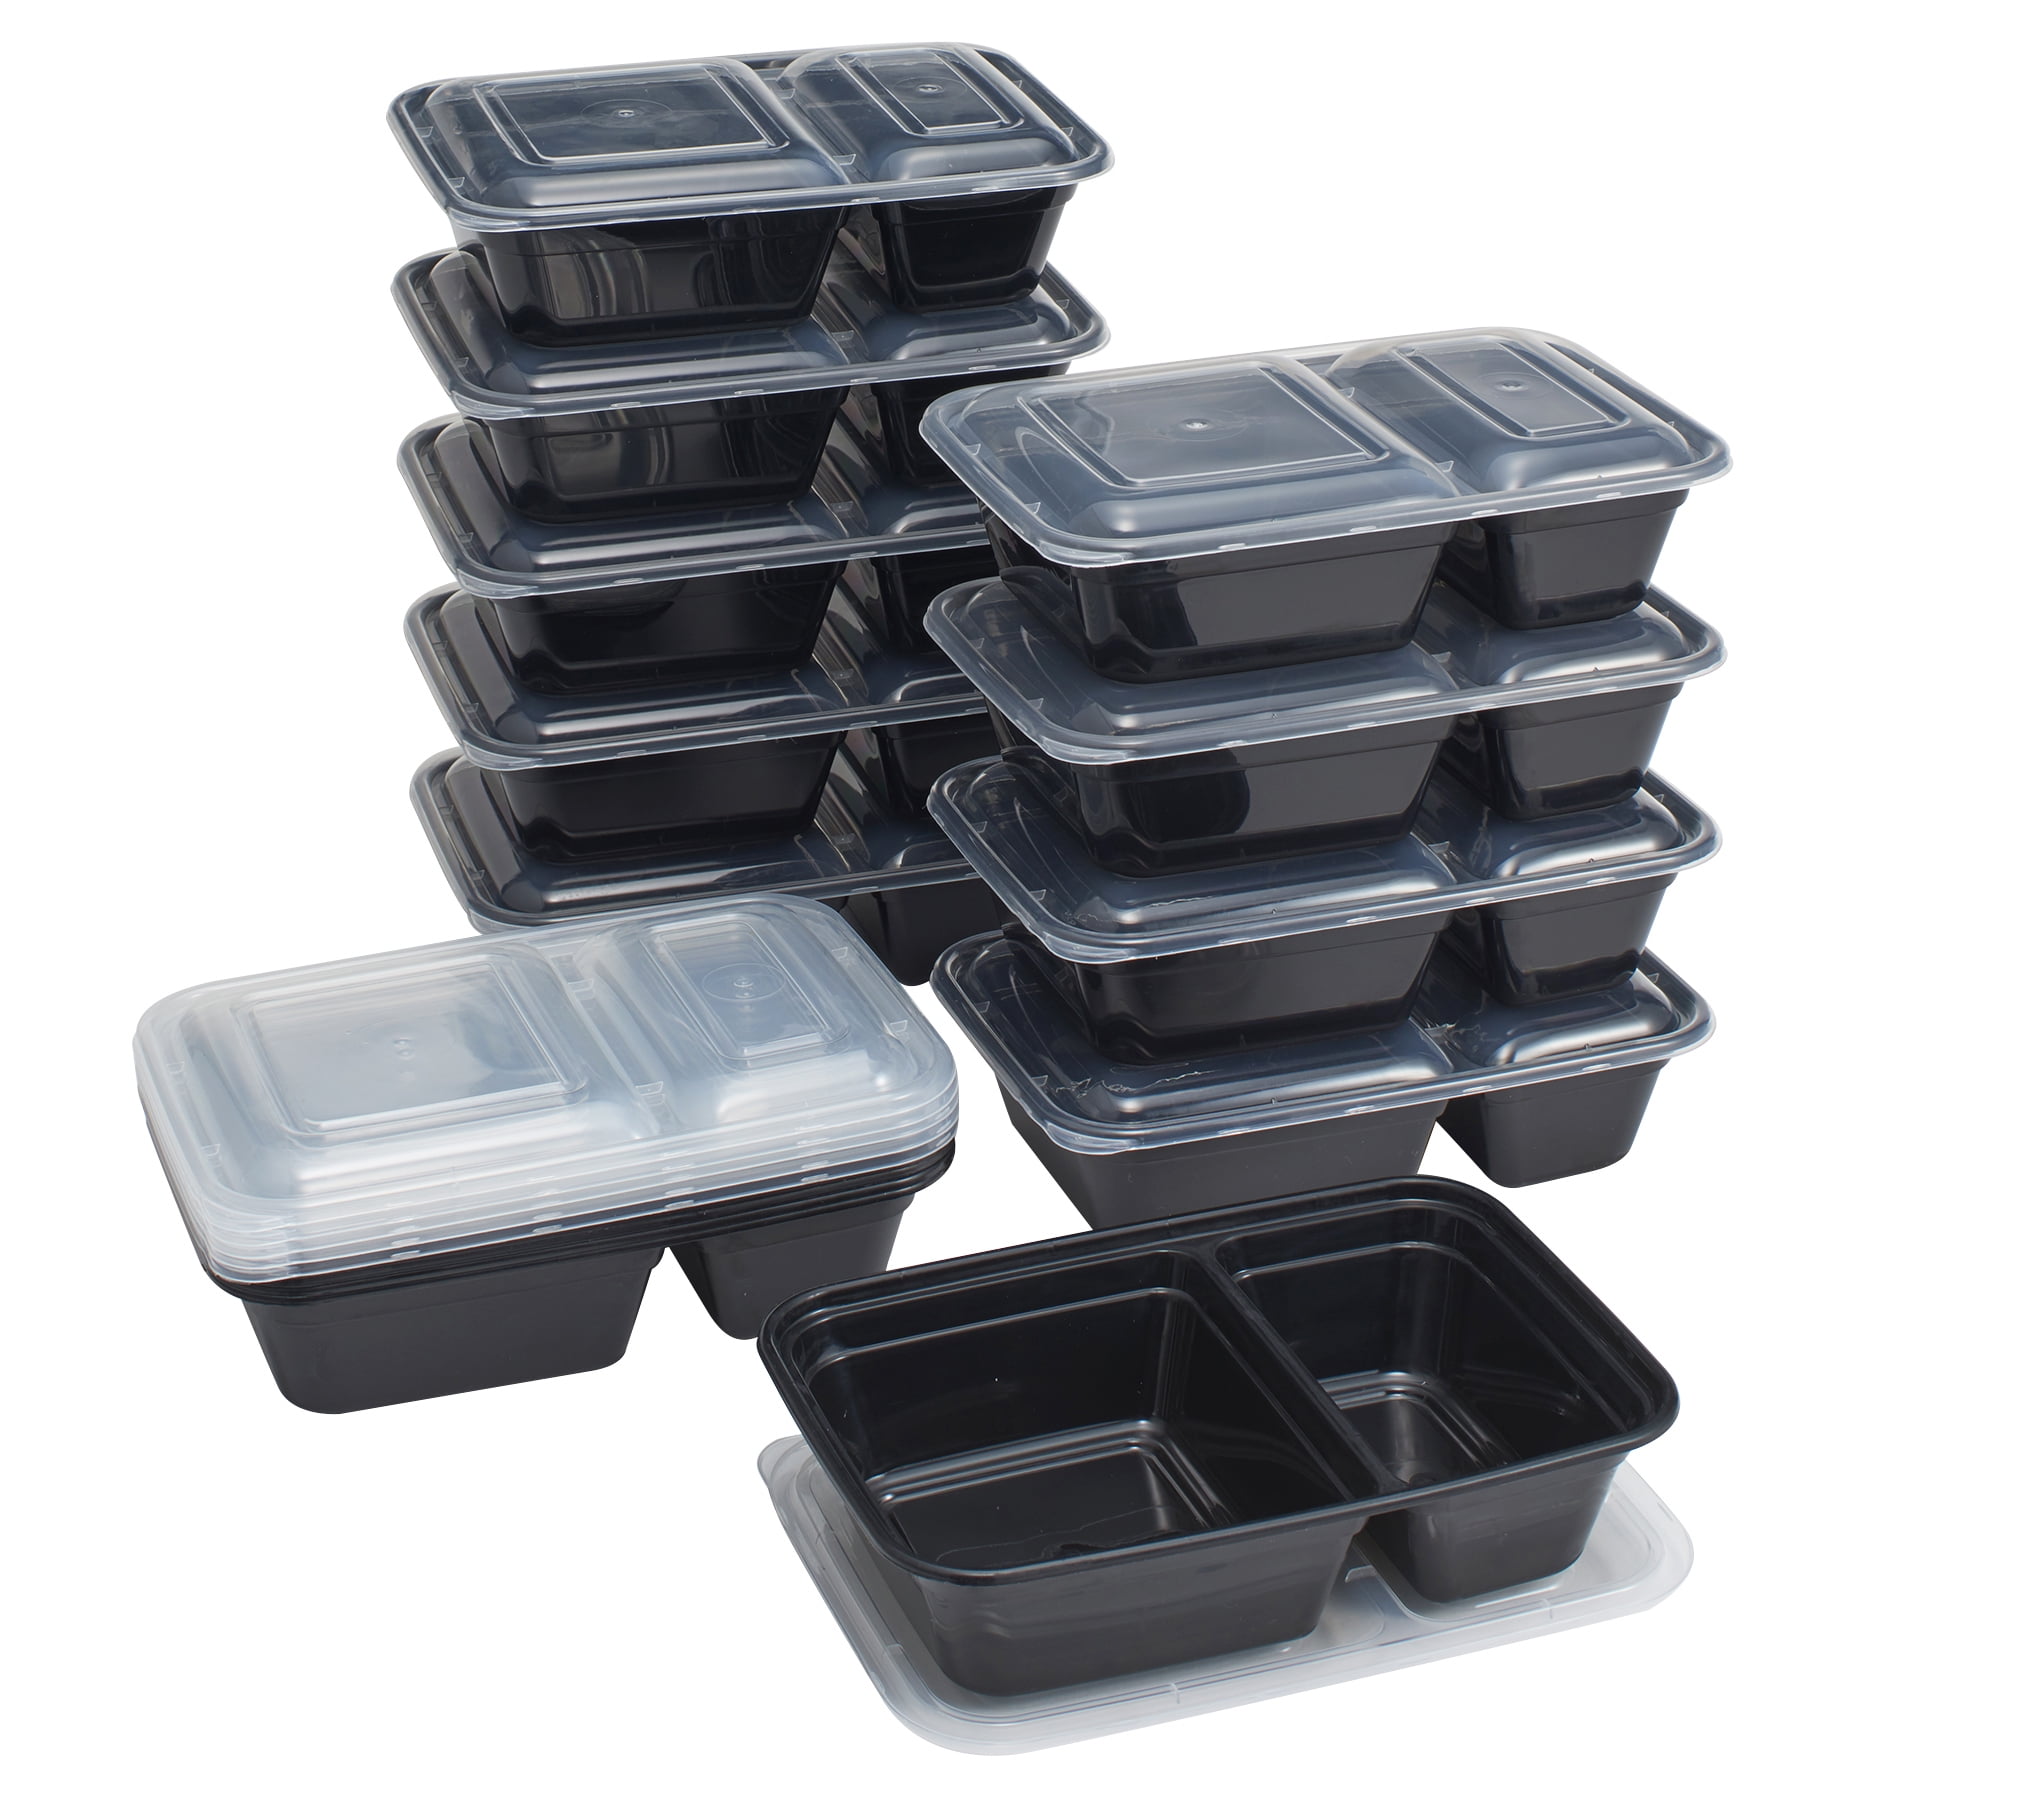 Reli. Meal Prep Containers, 30 oz. (50 Pack) - Black 2 Compartment